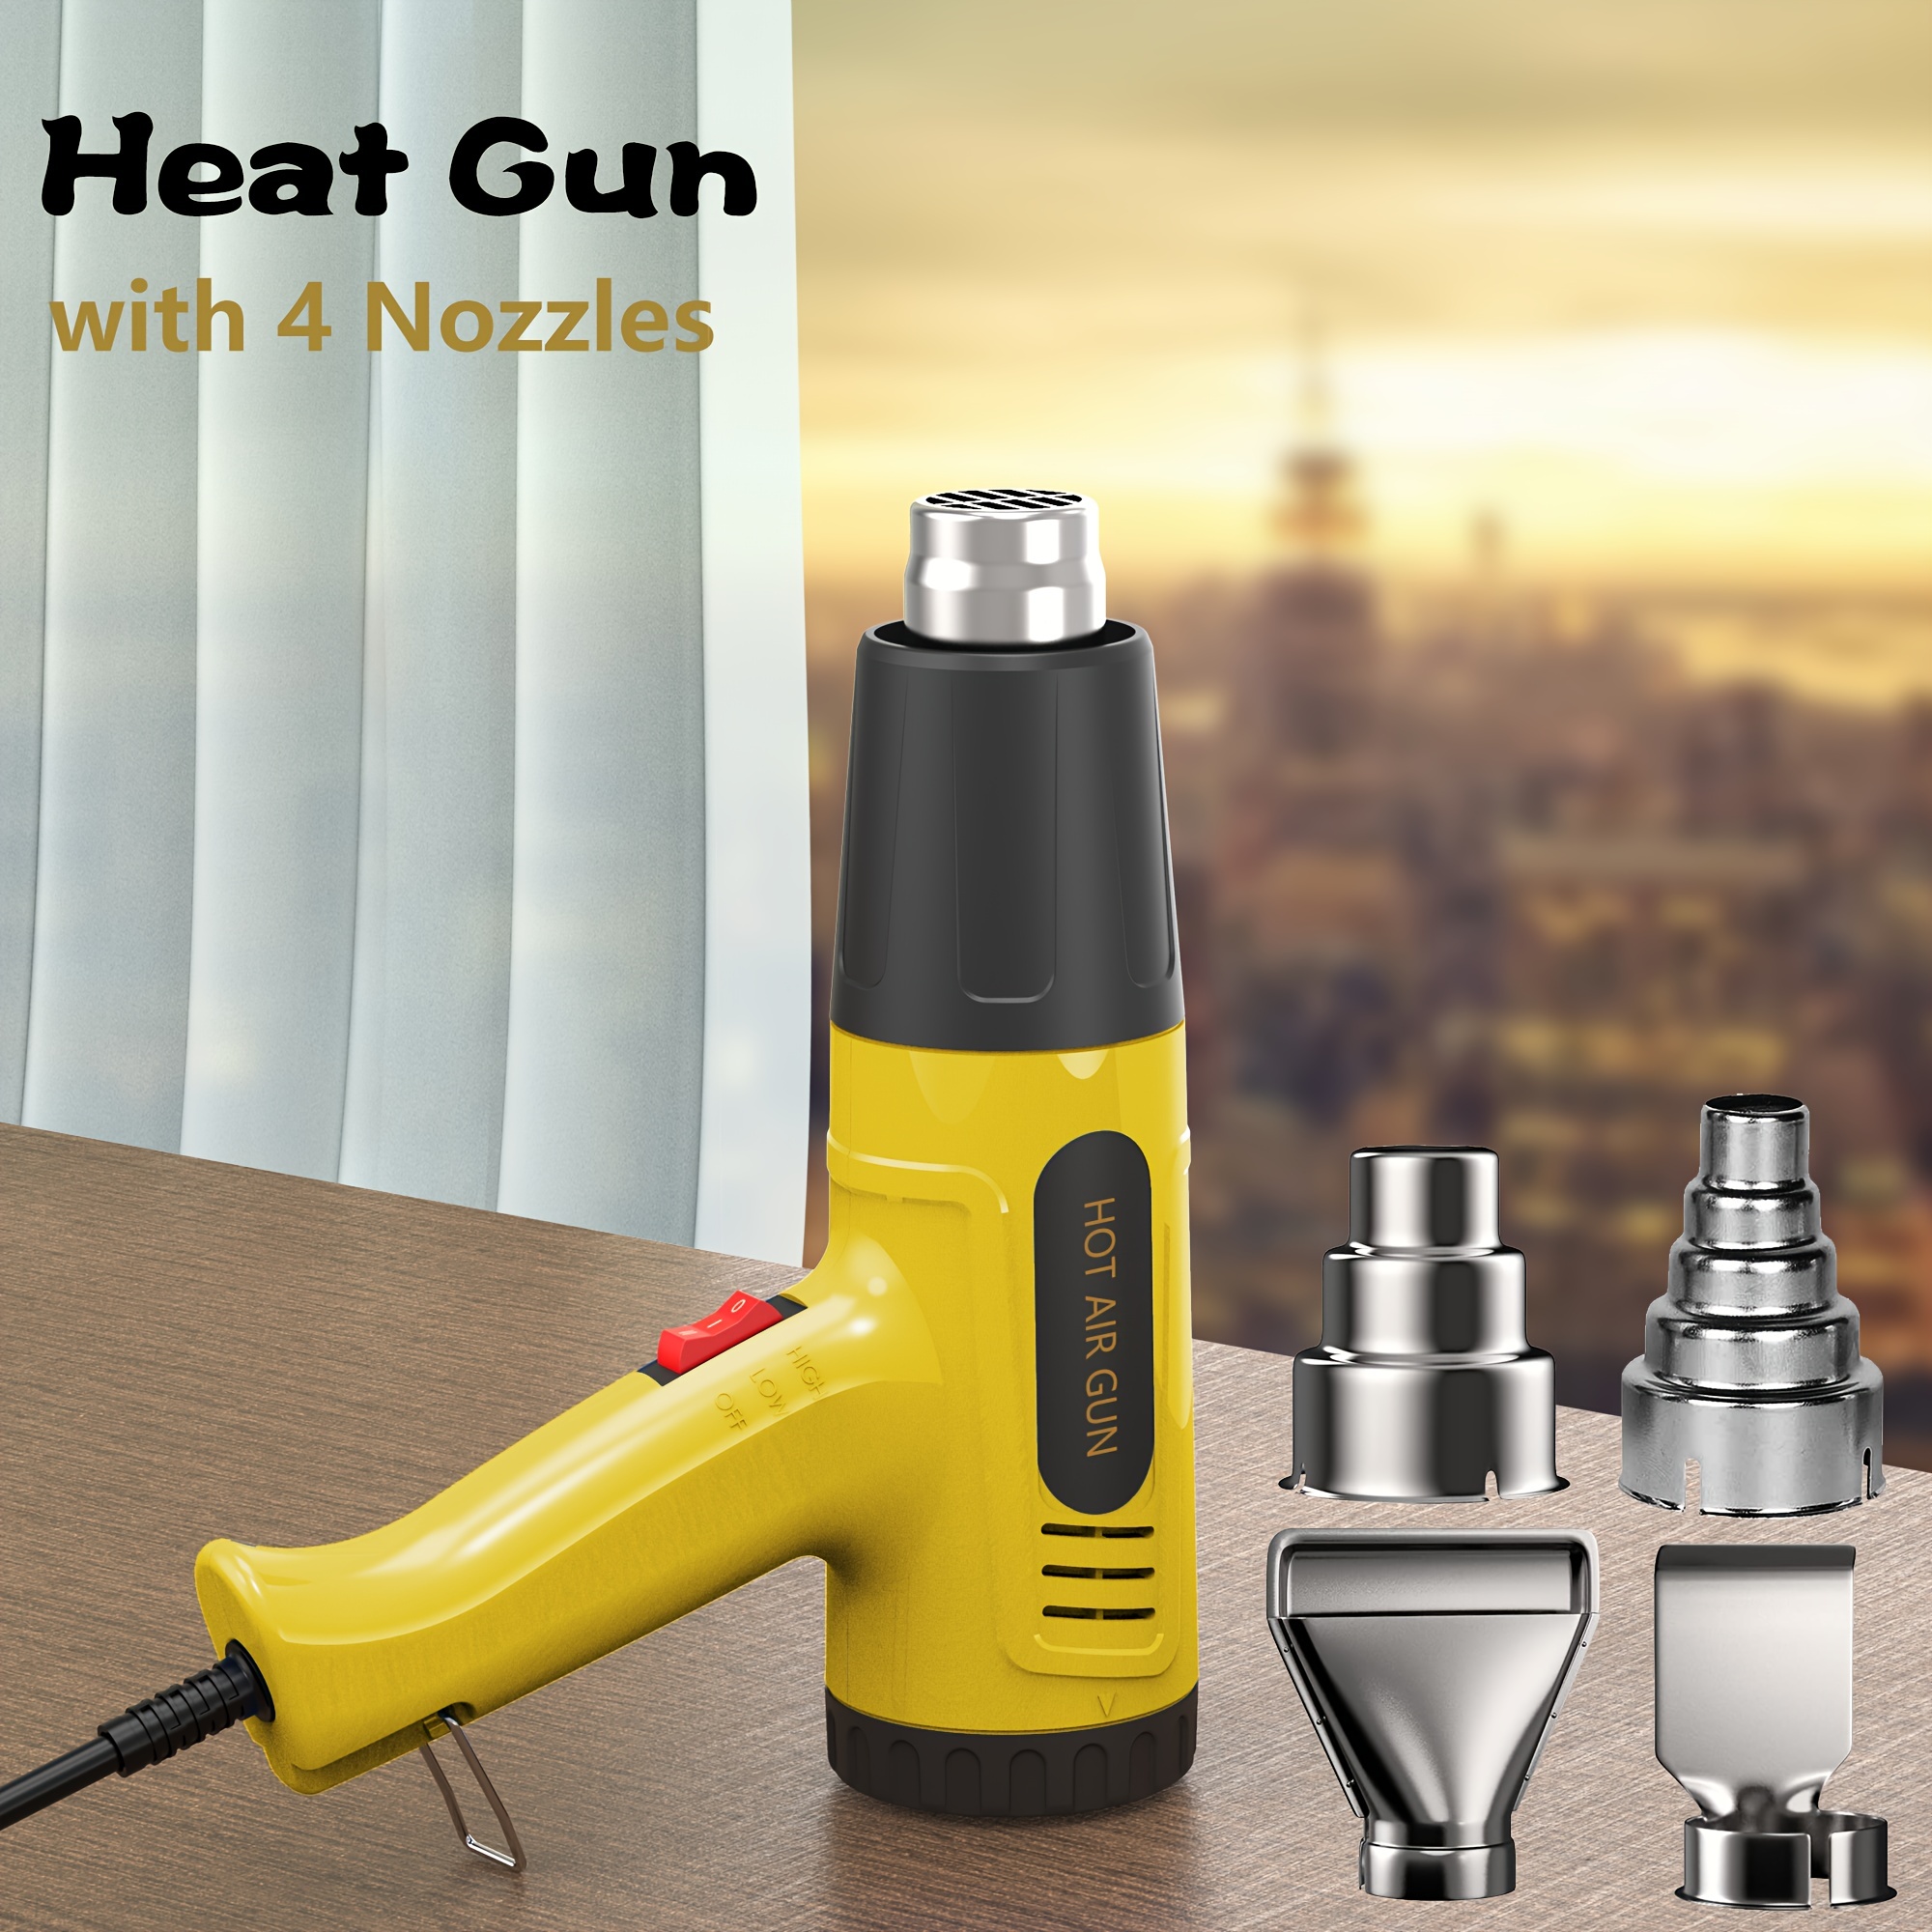 iSmoke Heat Gun 1500W Hot Air Gun 140°F~1112°F(60°C- 600°C) Variable Temperature Control, Fast Heating, Overload Protection, 4 Nozzles, Suitable for